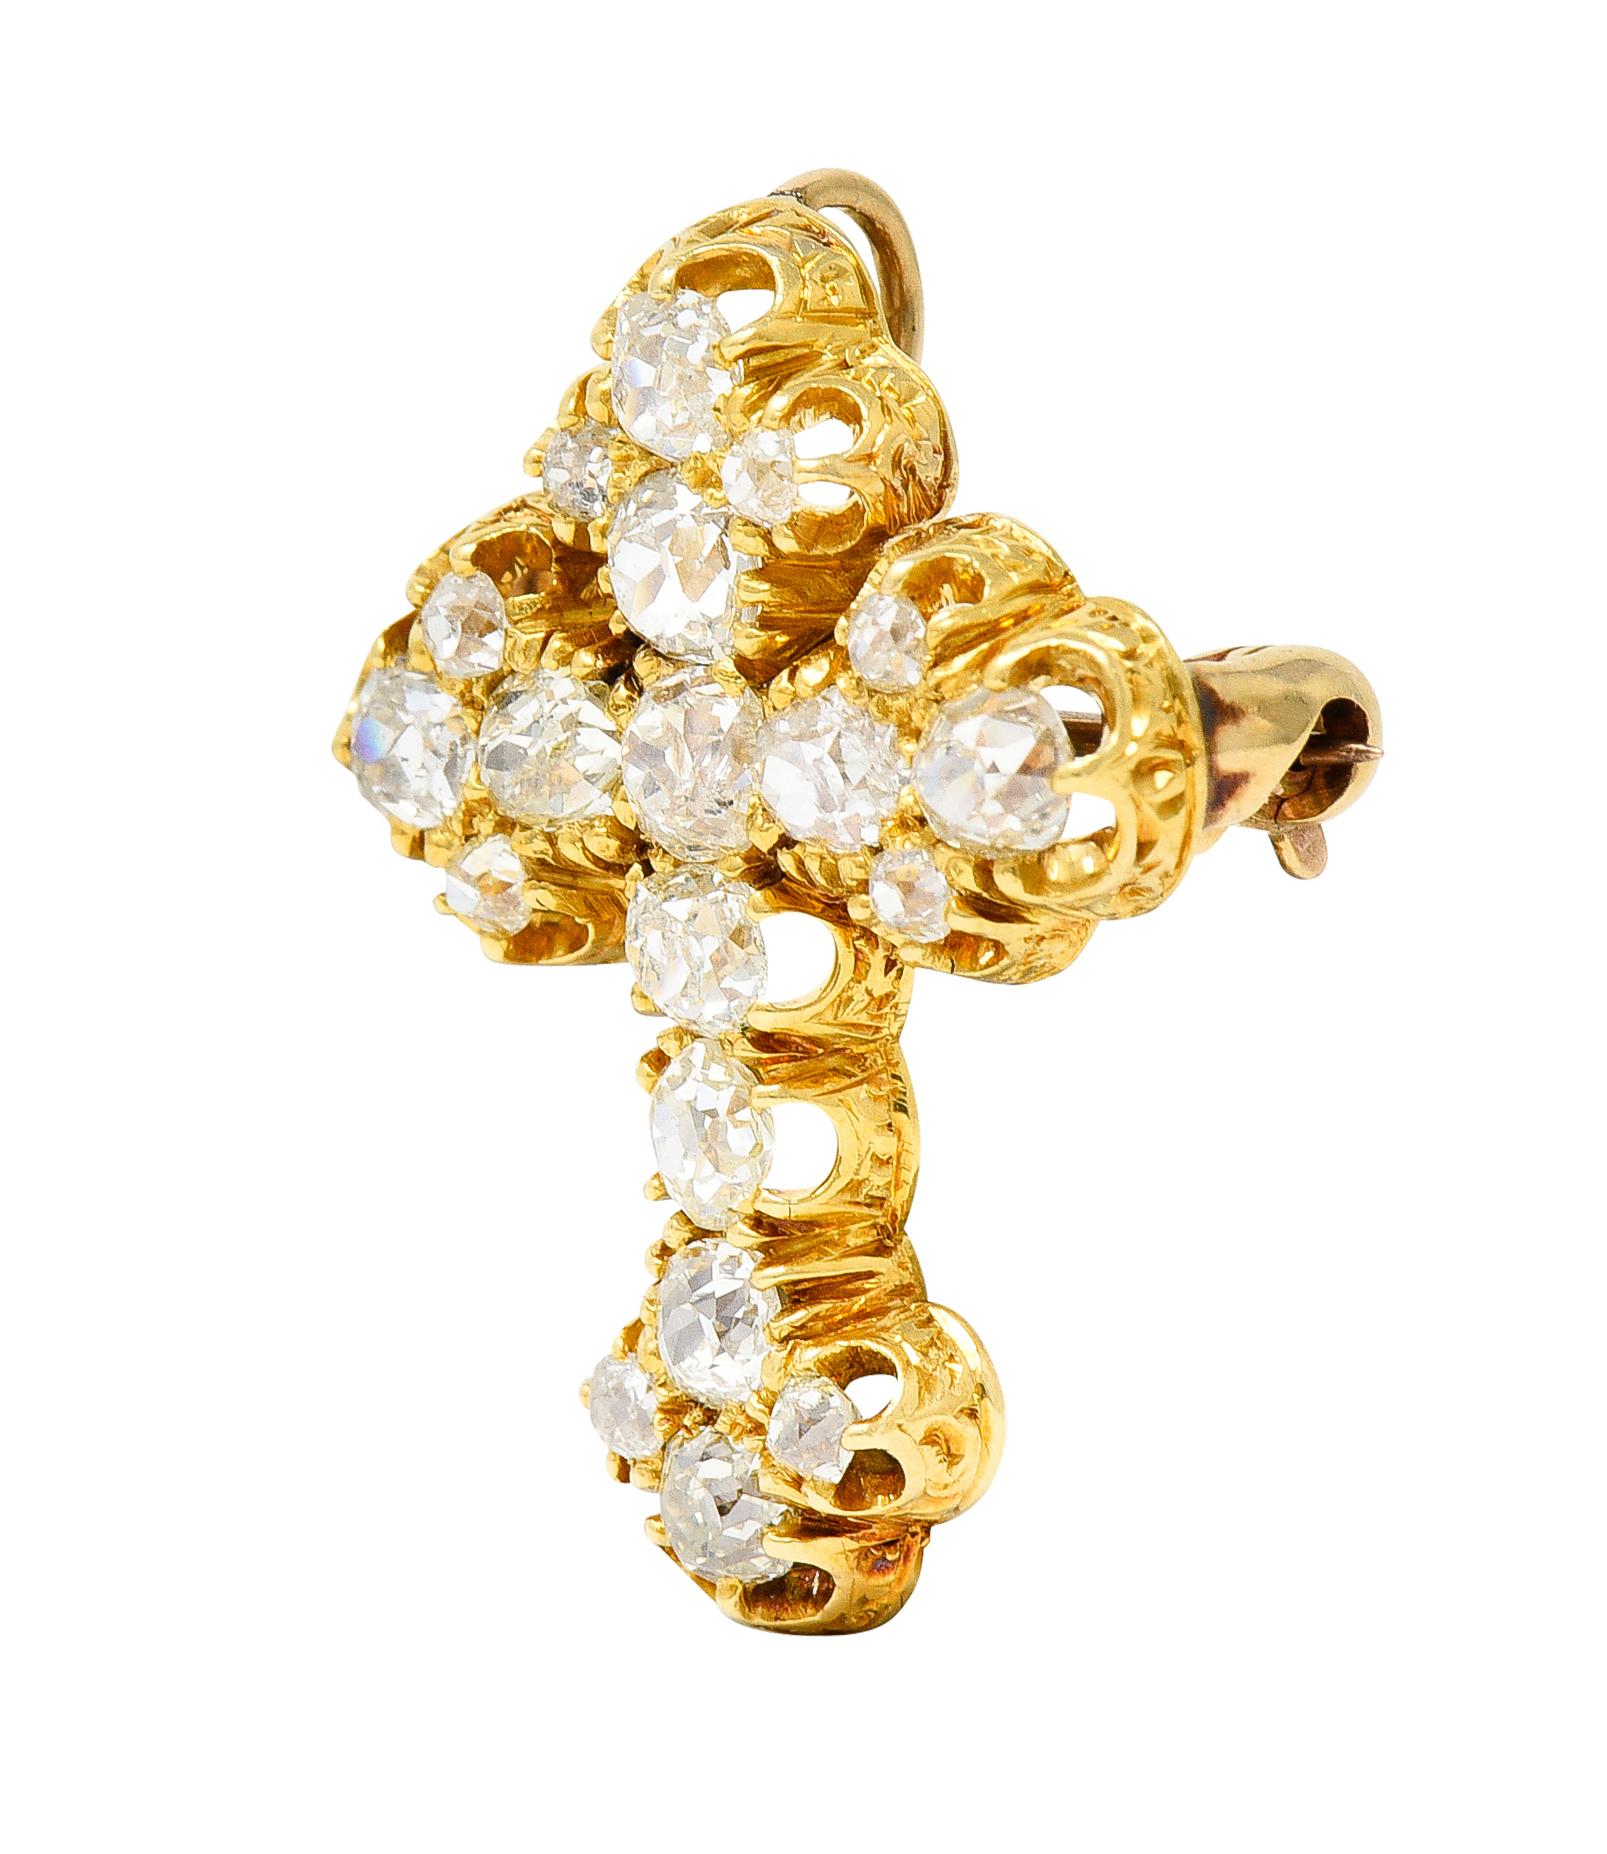 Pendant brooch is designed as a cross with old mine cut diamonds belcher set throughout

Weighing in total approximately 2.00 carats with G to I color with overall SI clarity

Profile is hand-engraved with a scrolling whiplash design

Completed by a